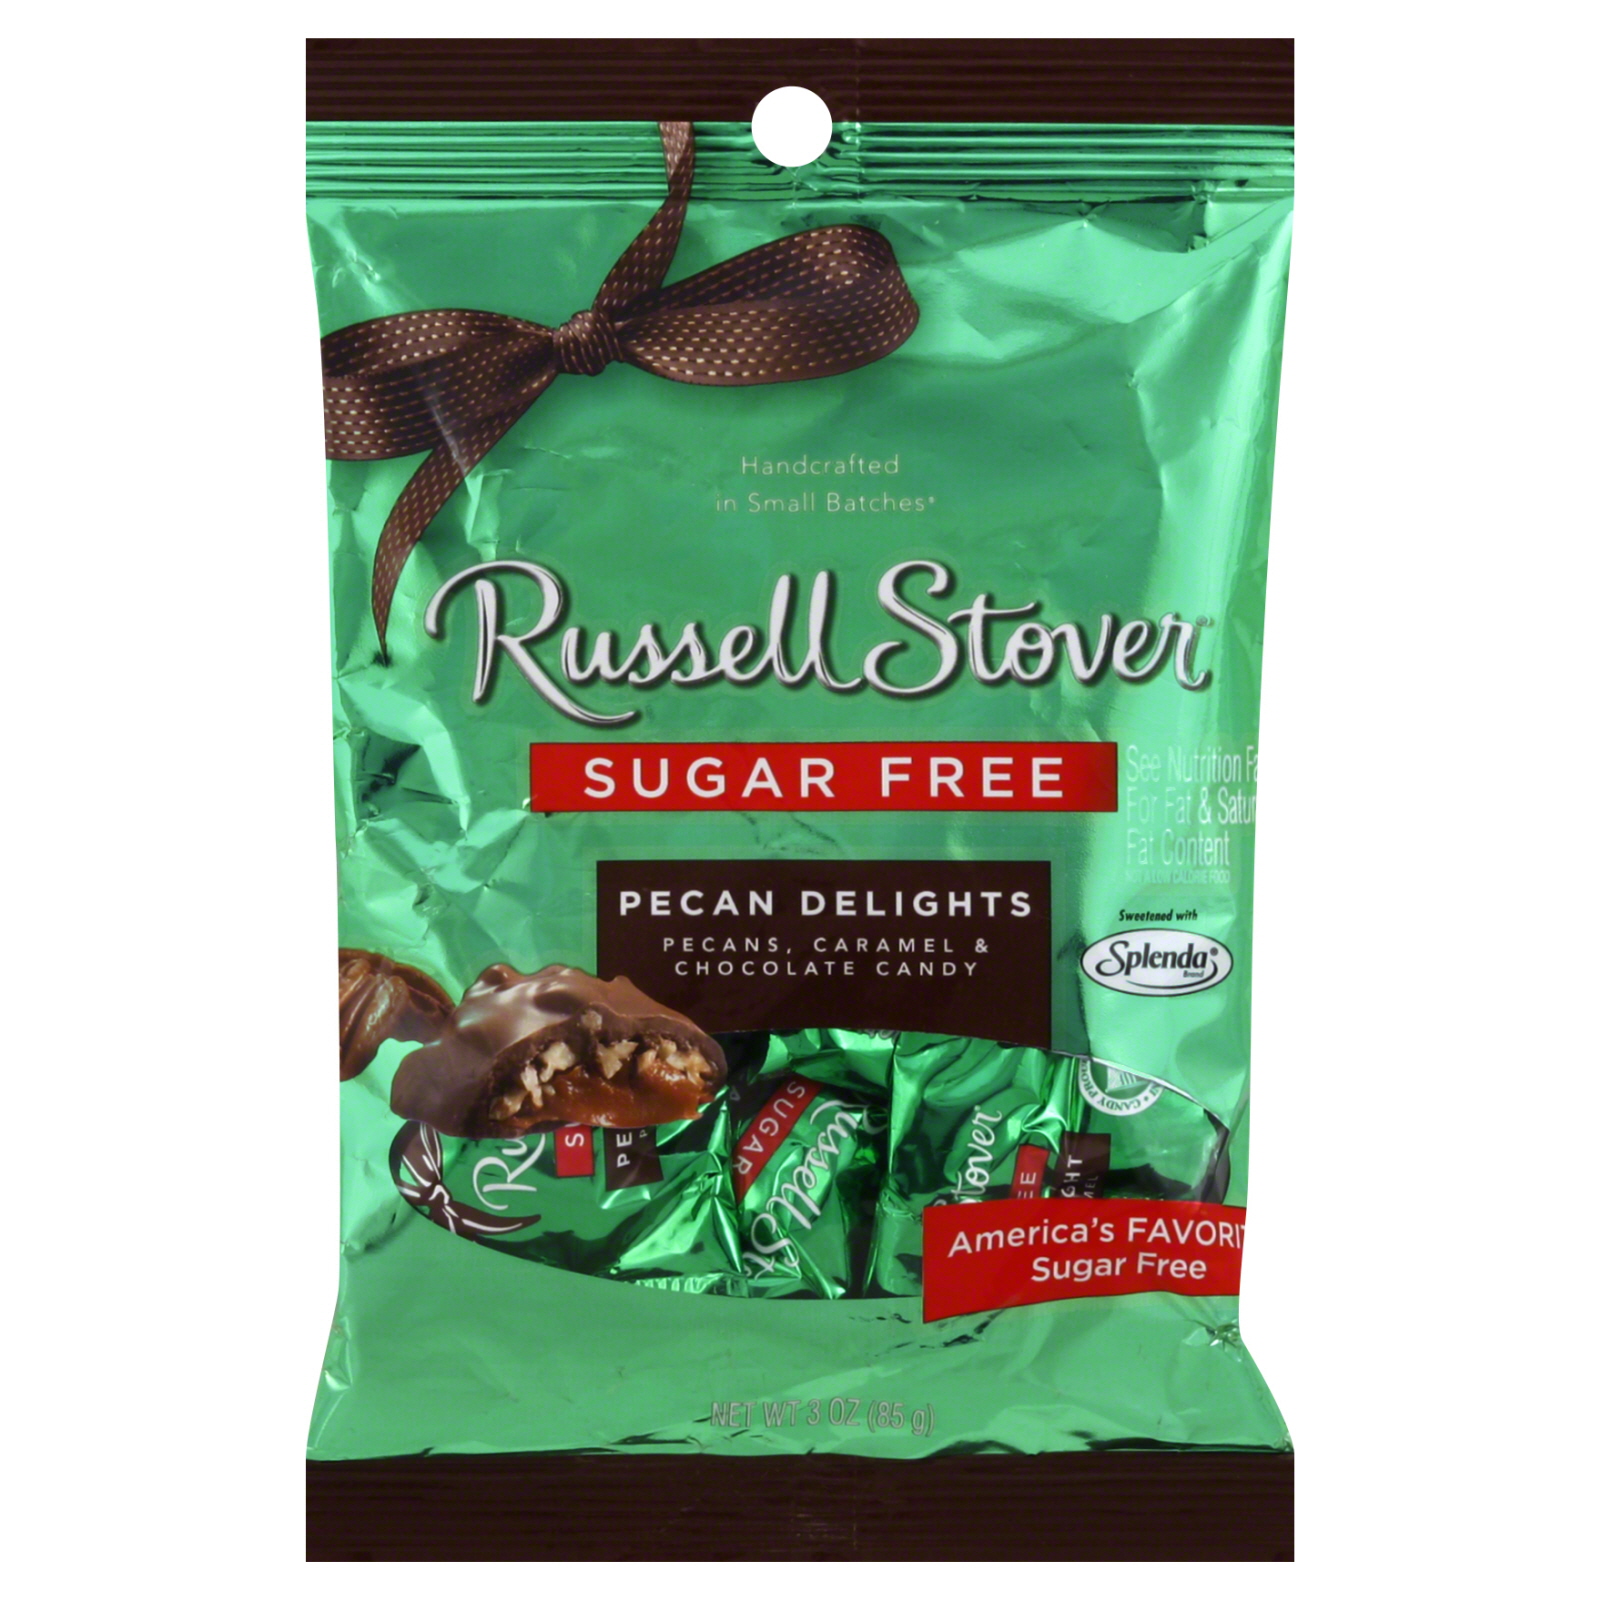 Russell Stover Sugar Free Pecan Delights, 3 oz (85 g)